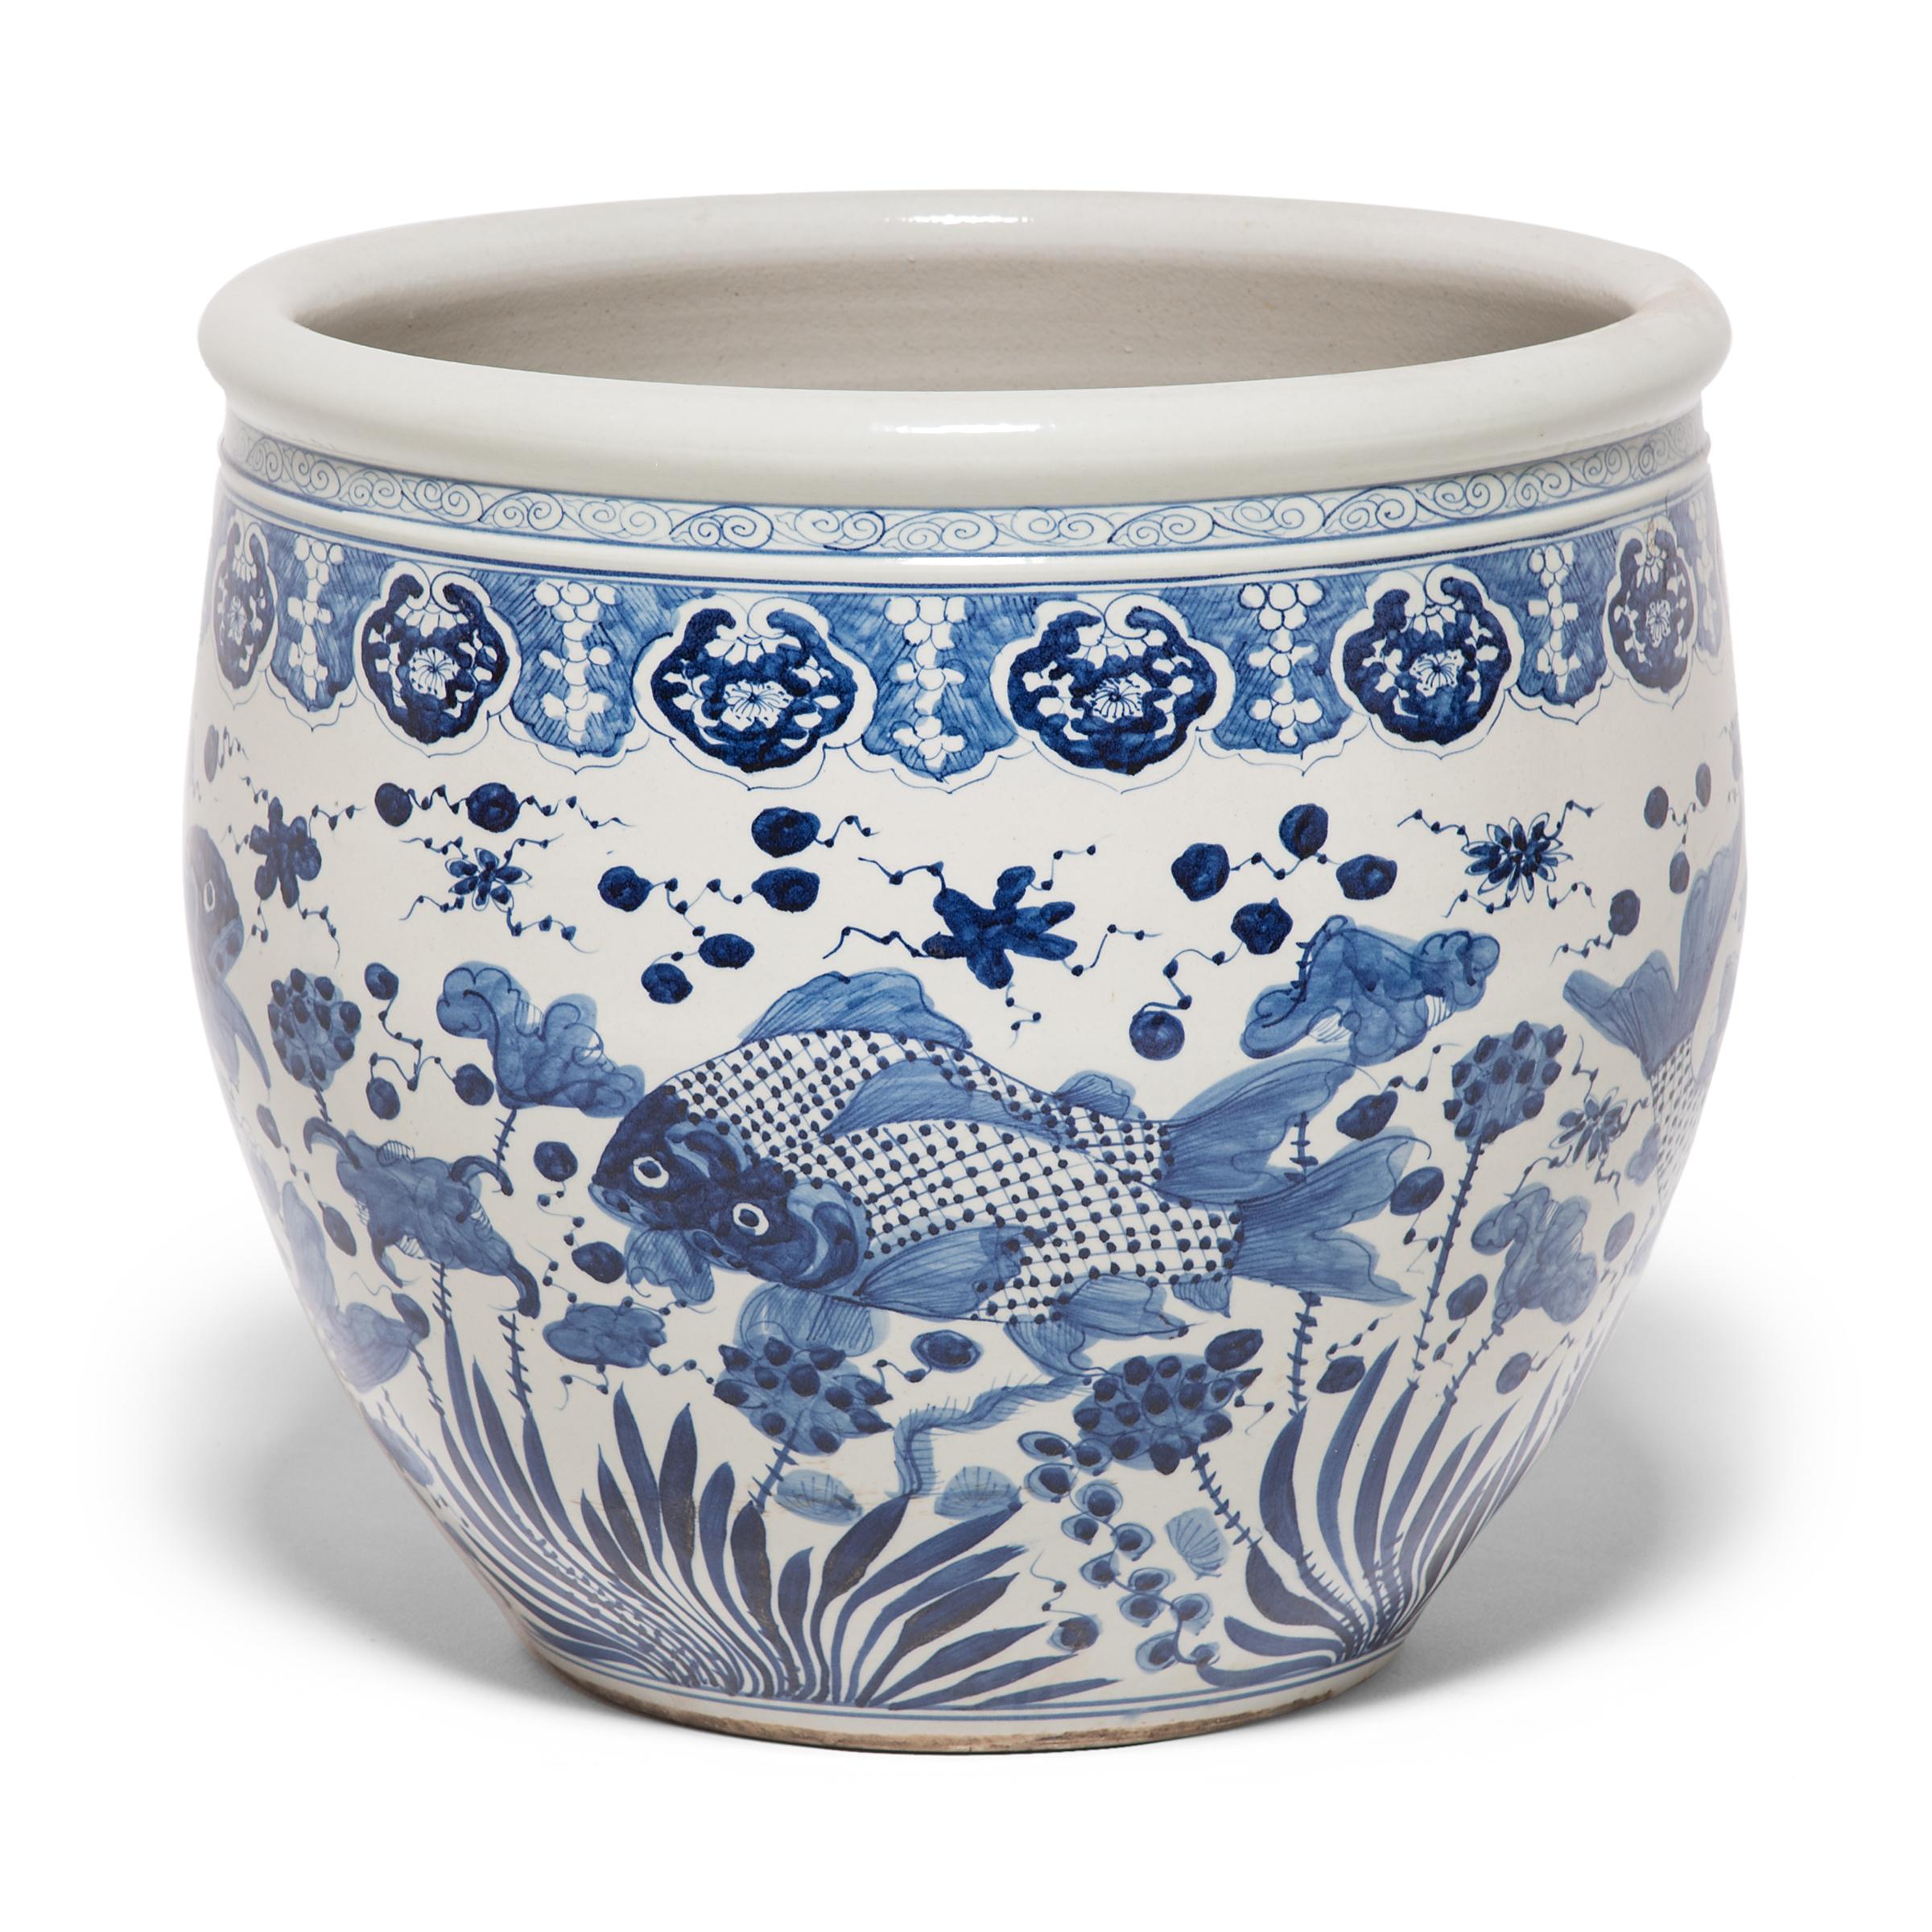 This grand, blue-and-white porcelain bowl is hand-painted with flora and fauna of the sea, offering blessings of wealth, abundance, and the contented harmony of a fish in water. Chinese blue-and-white ceramics have inspired ceramists worldwide since